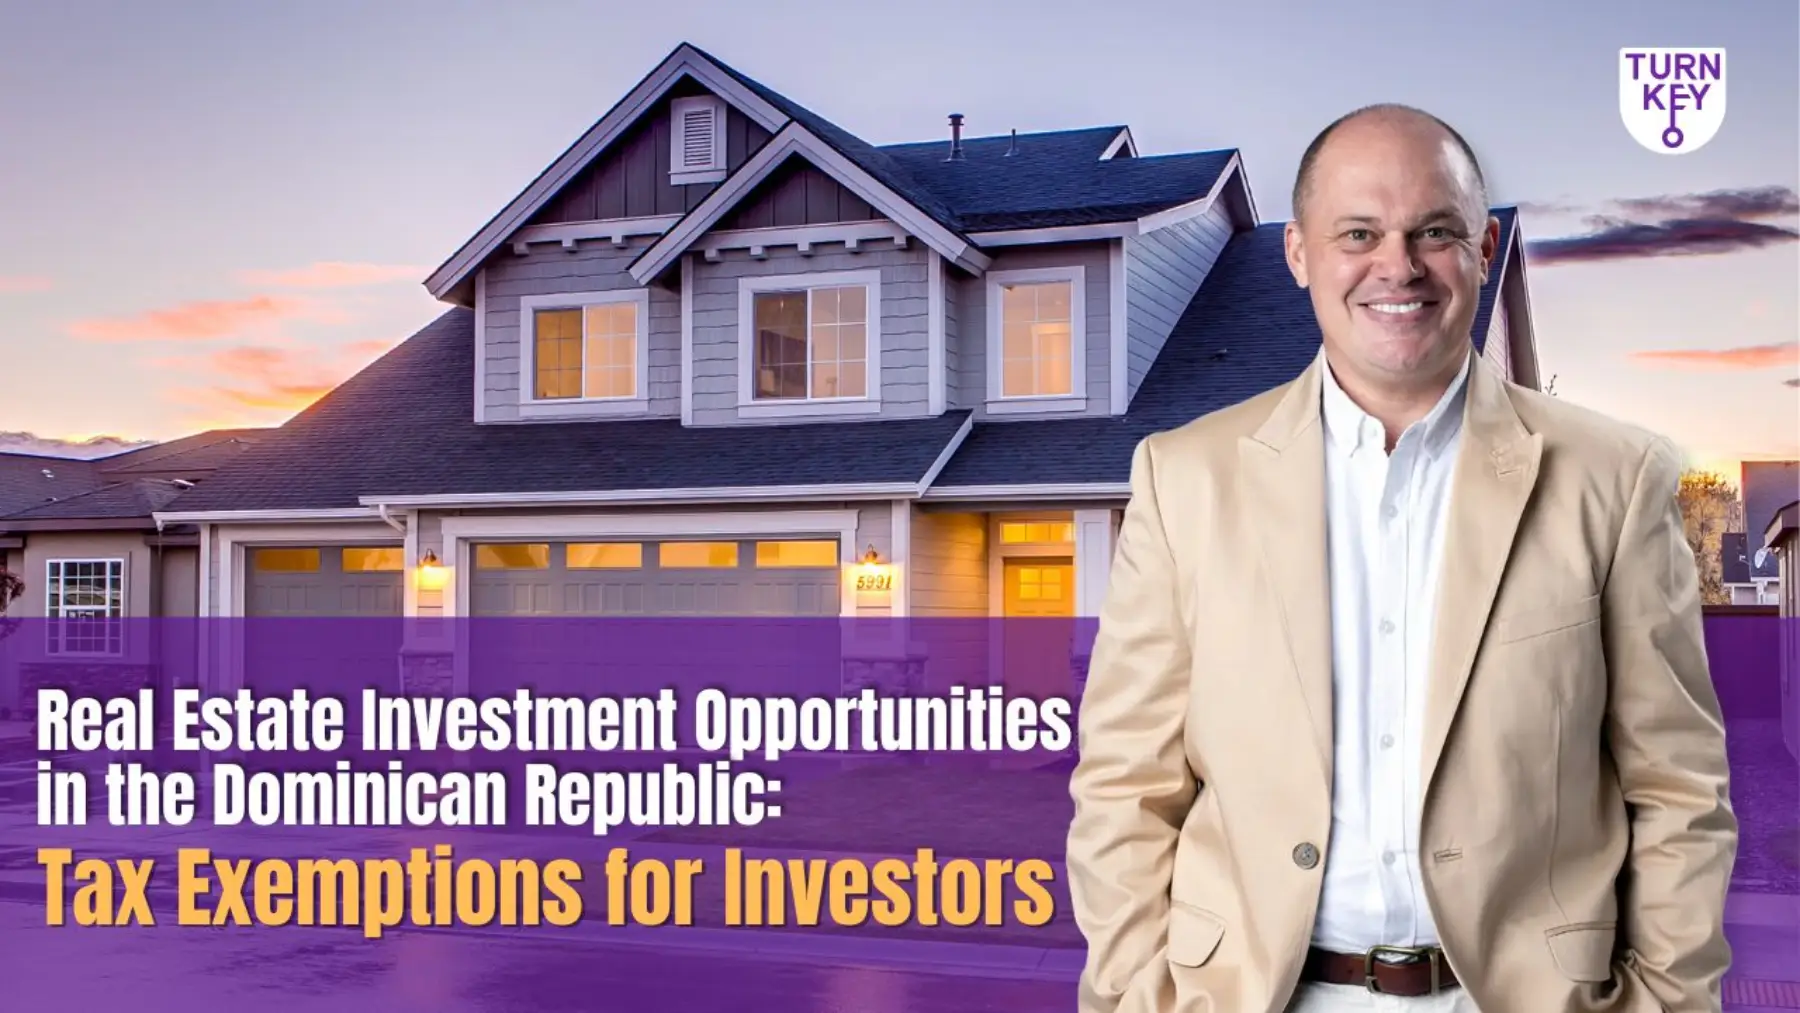 Real Estate Investment Opportunities in the Dominican Republic:Tax Exemptions for Investors